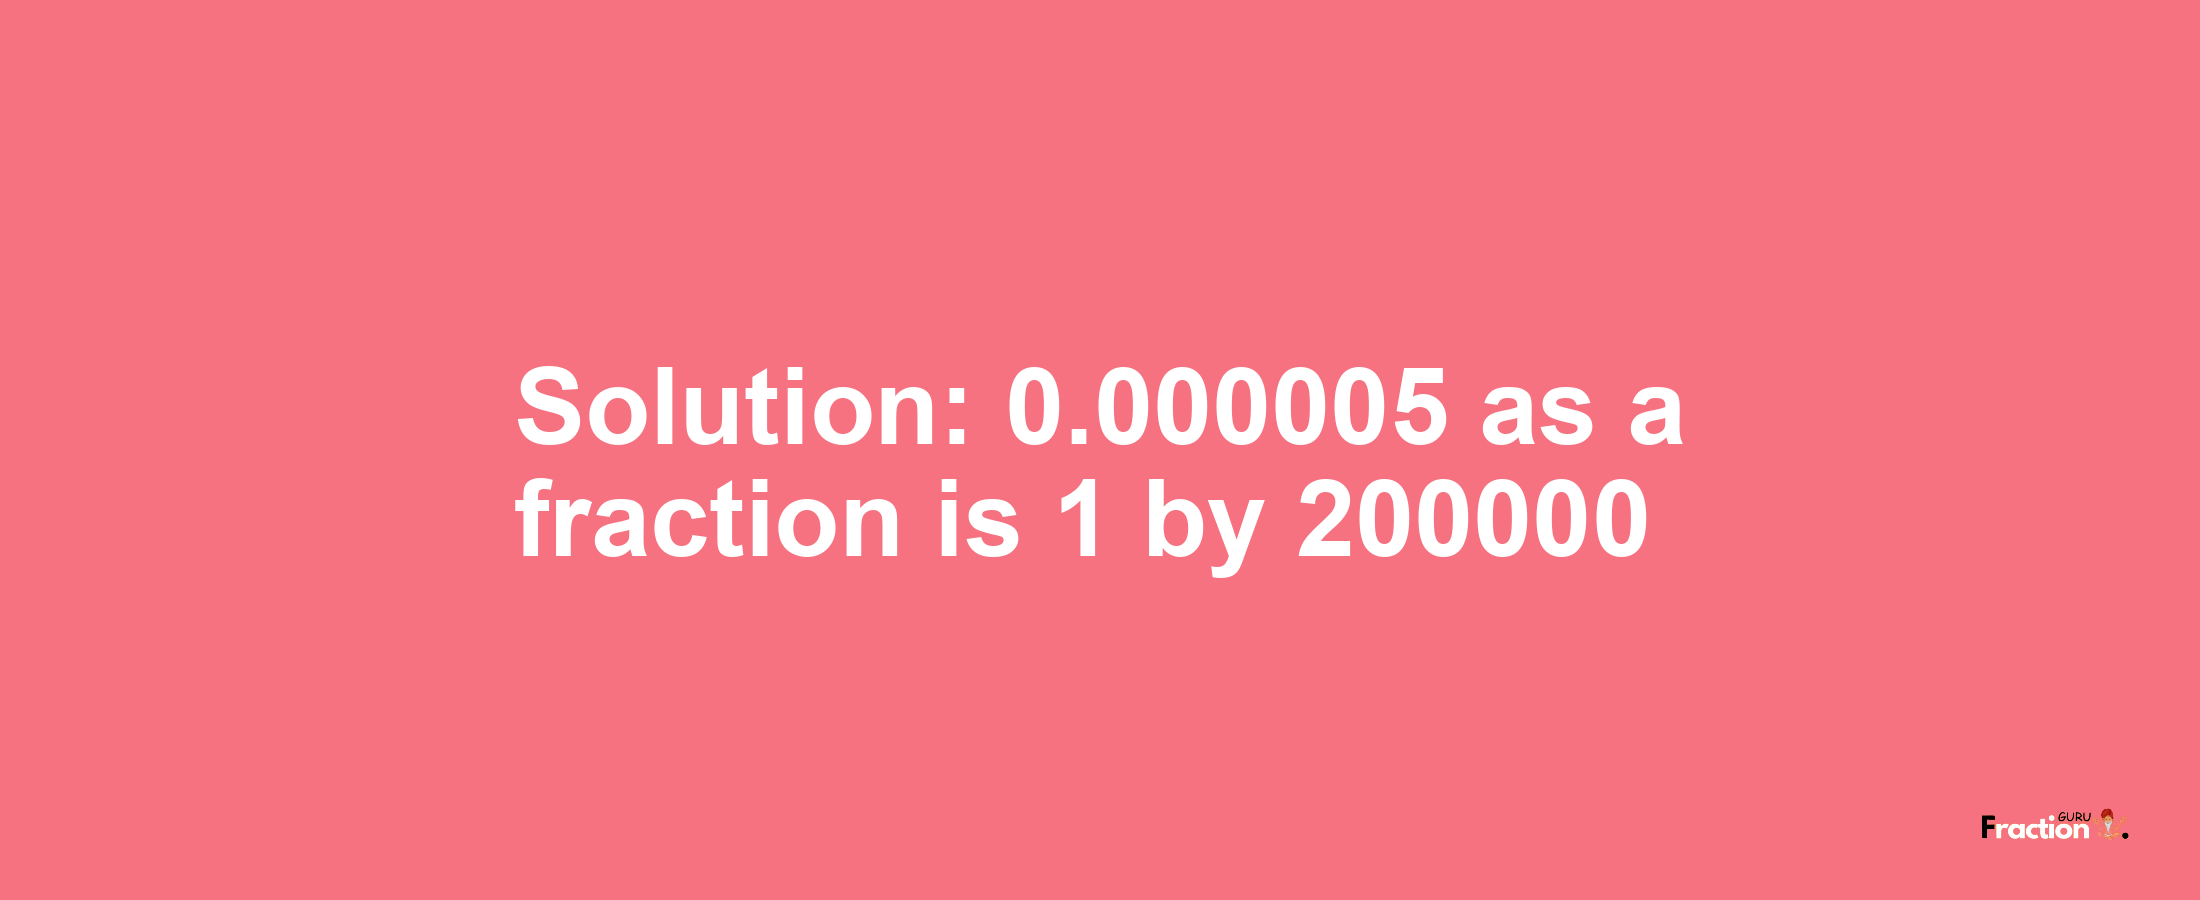 Solution:0.000005 as a fraction is 1/200000